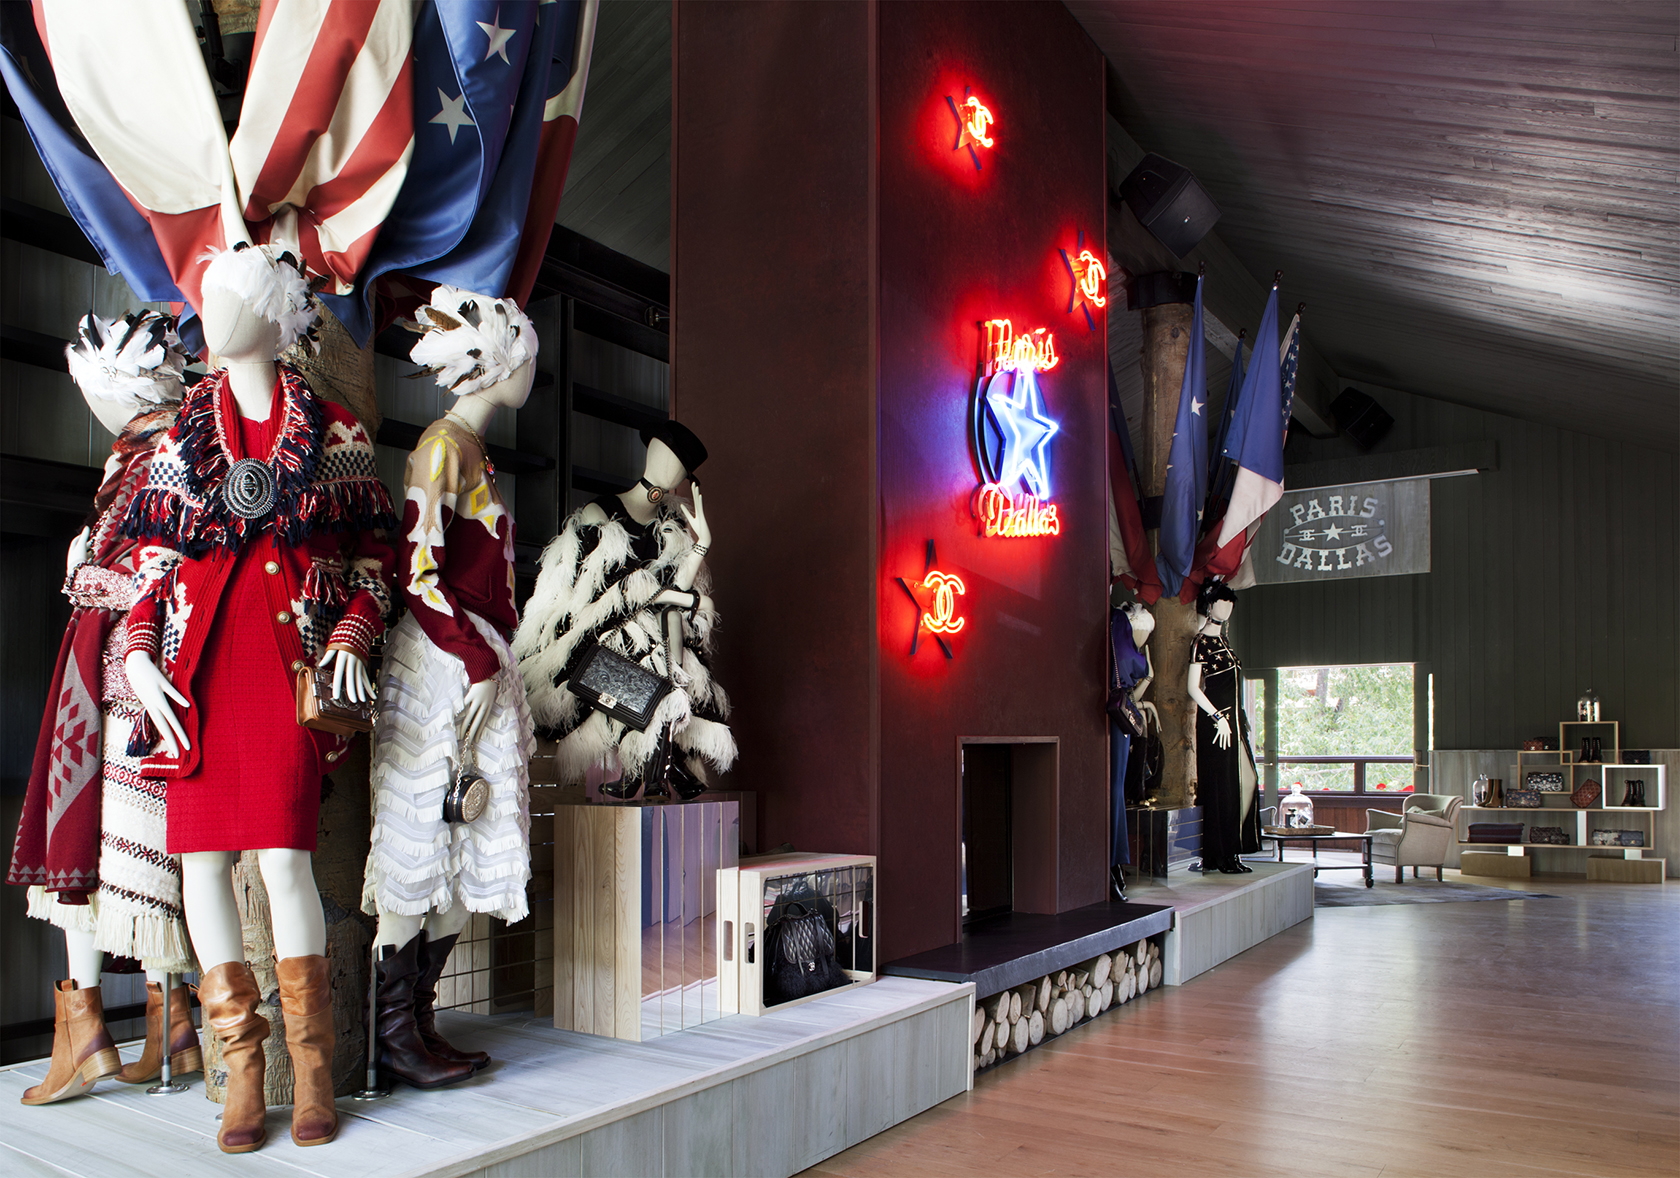 Illuminated Chanel signs display with a red Texas star at the new boutique's entrance. Karl Lagerfeld found inspiration from the American west for his new collection.